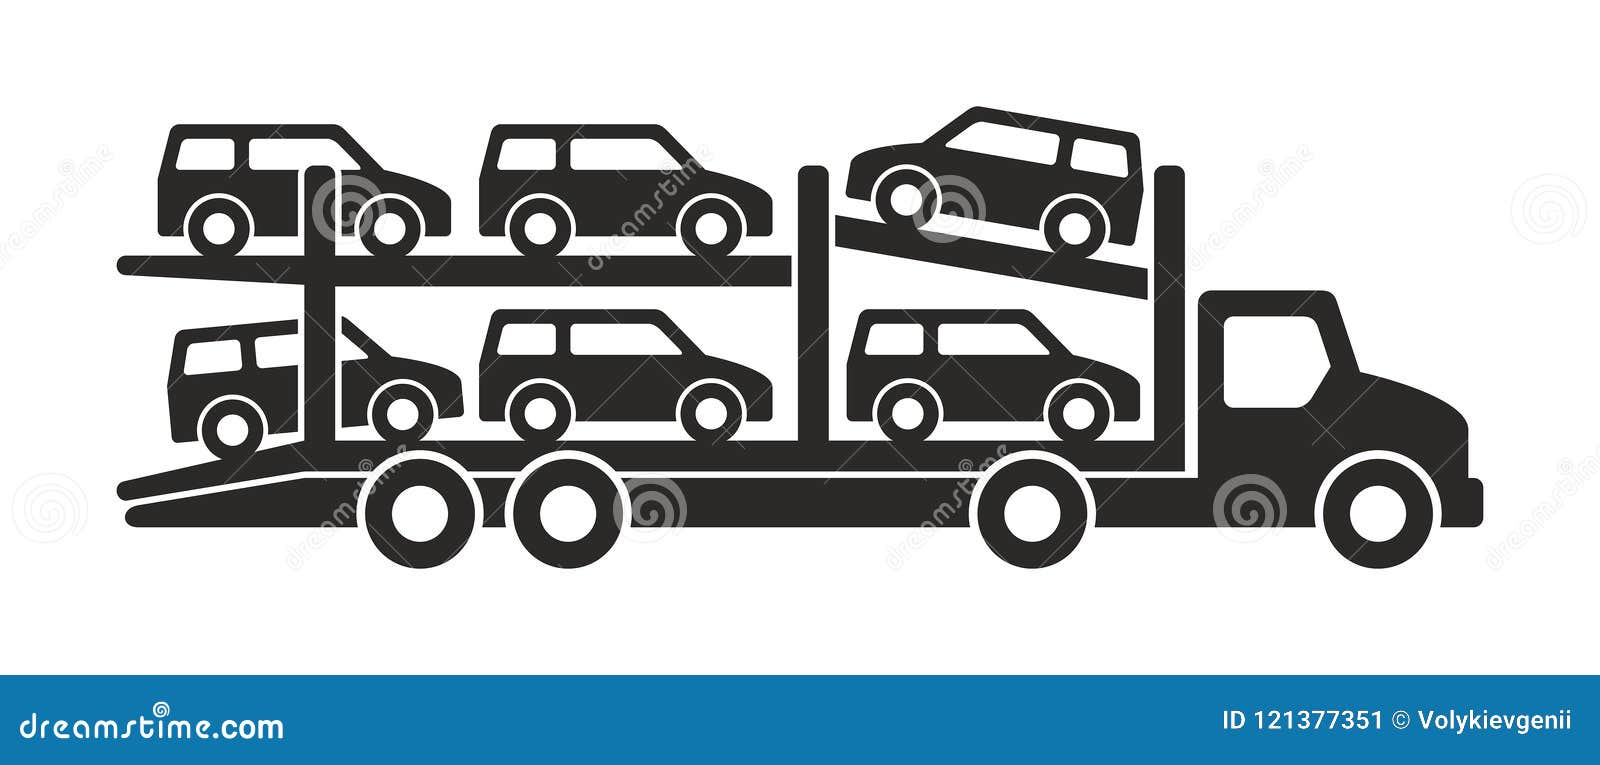 car carrier truck icon, monochrome style